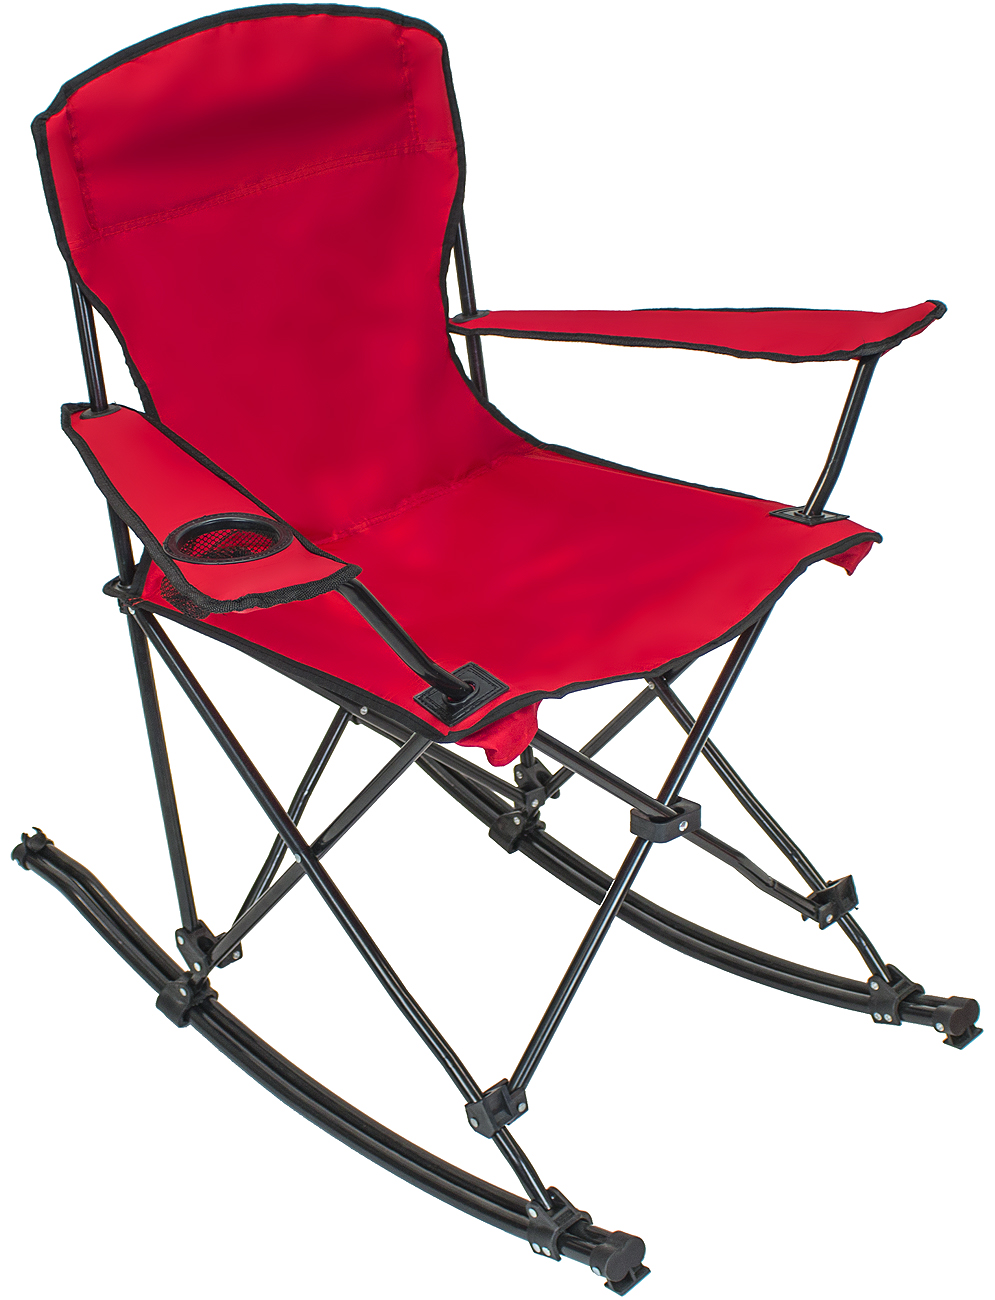 Sorbus Quad Rocking Chair with Cup Holder Cooler, Foldable Frame, and Portable Carry Bag, Recliner Chair Great&nbsp;Outdoor Chair&nbsp;for Camping, Sporting Events, Travel, Backyard, Patio, etc - image 1 of 13